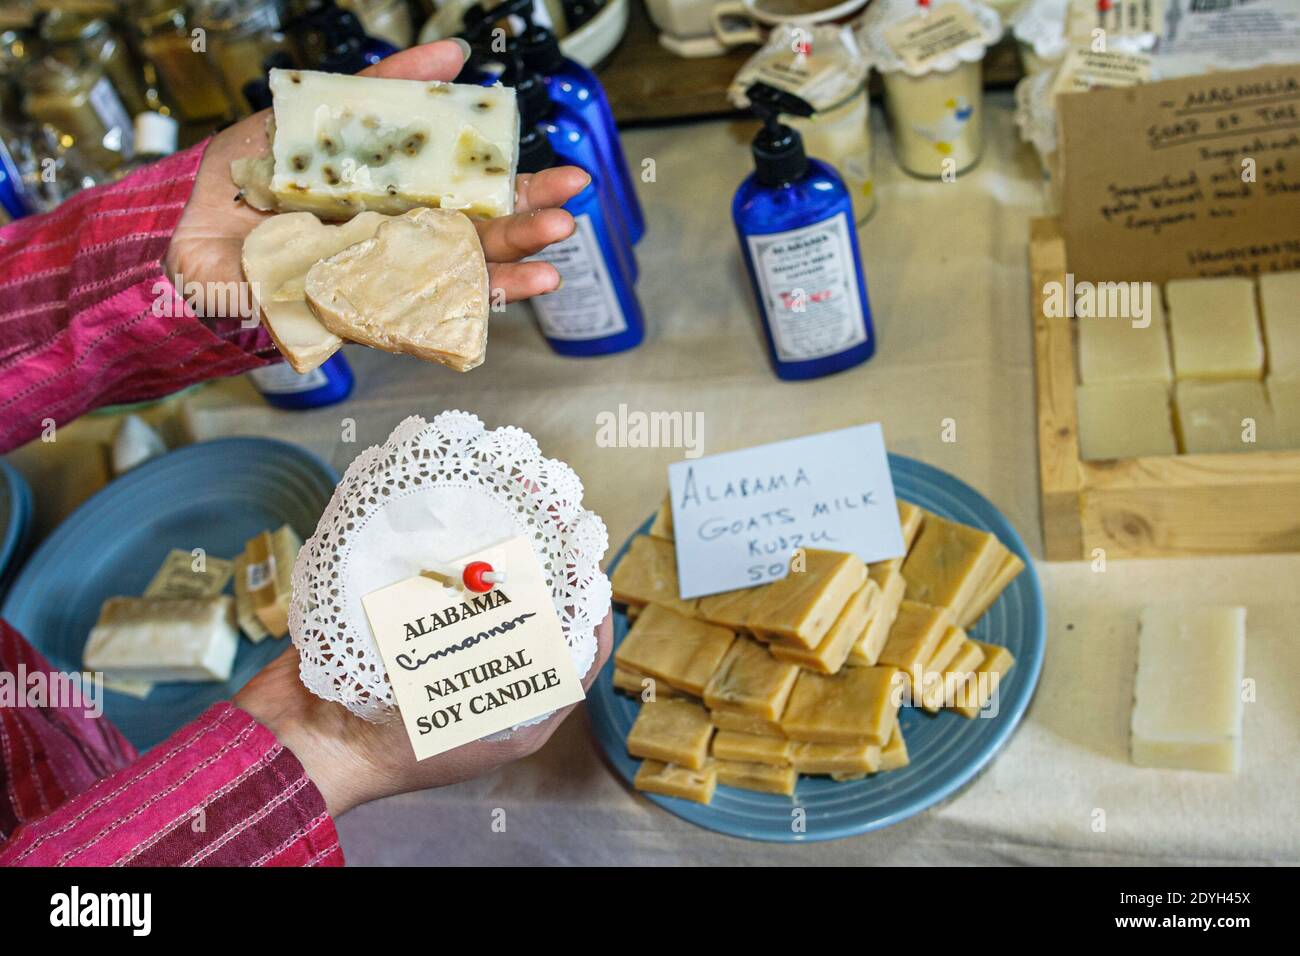 Birmingham Alabama,Red Rain Anal General Store,sale display soy candle soap, Stock Photo